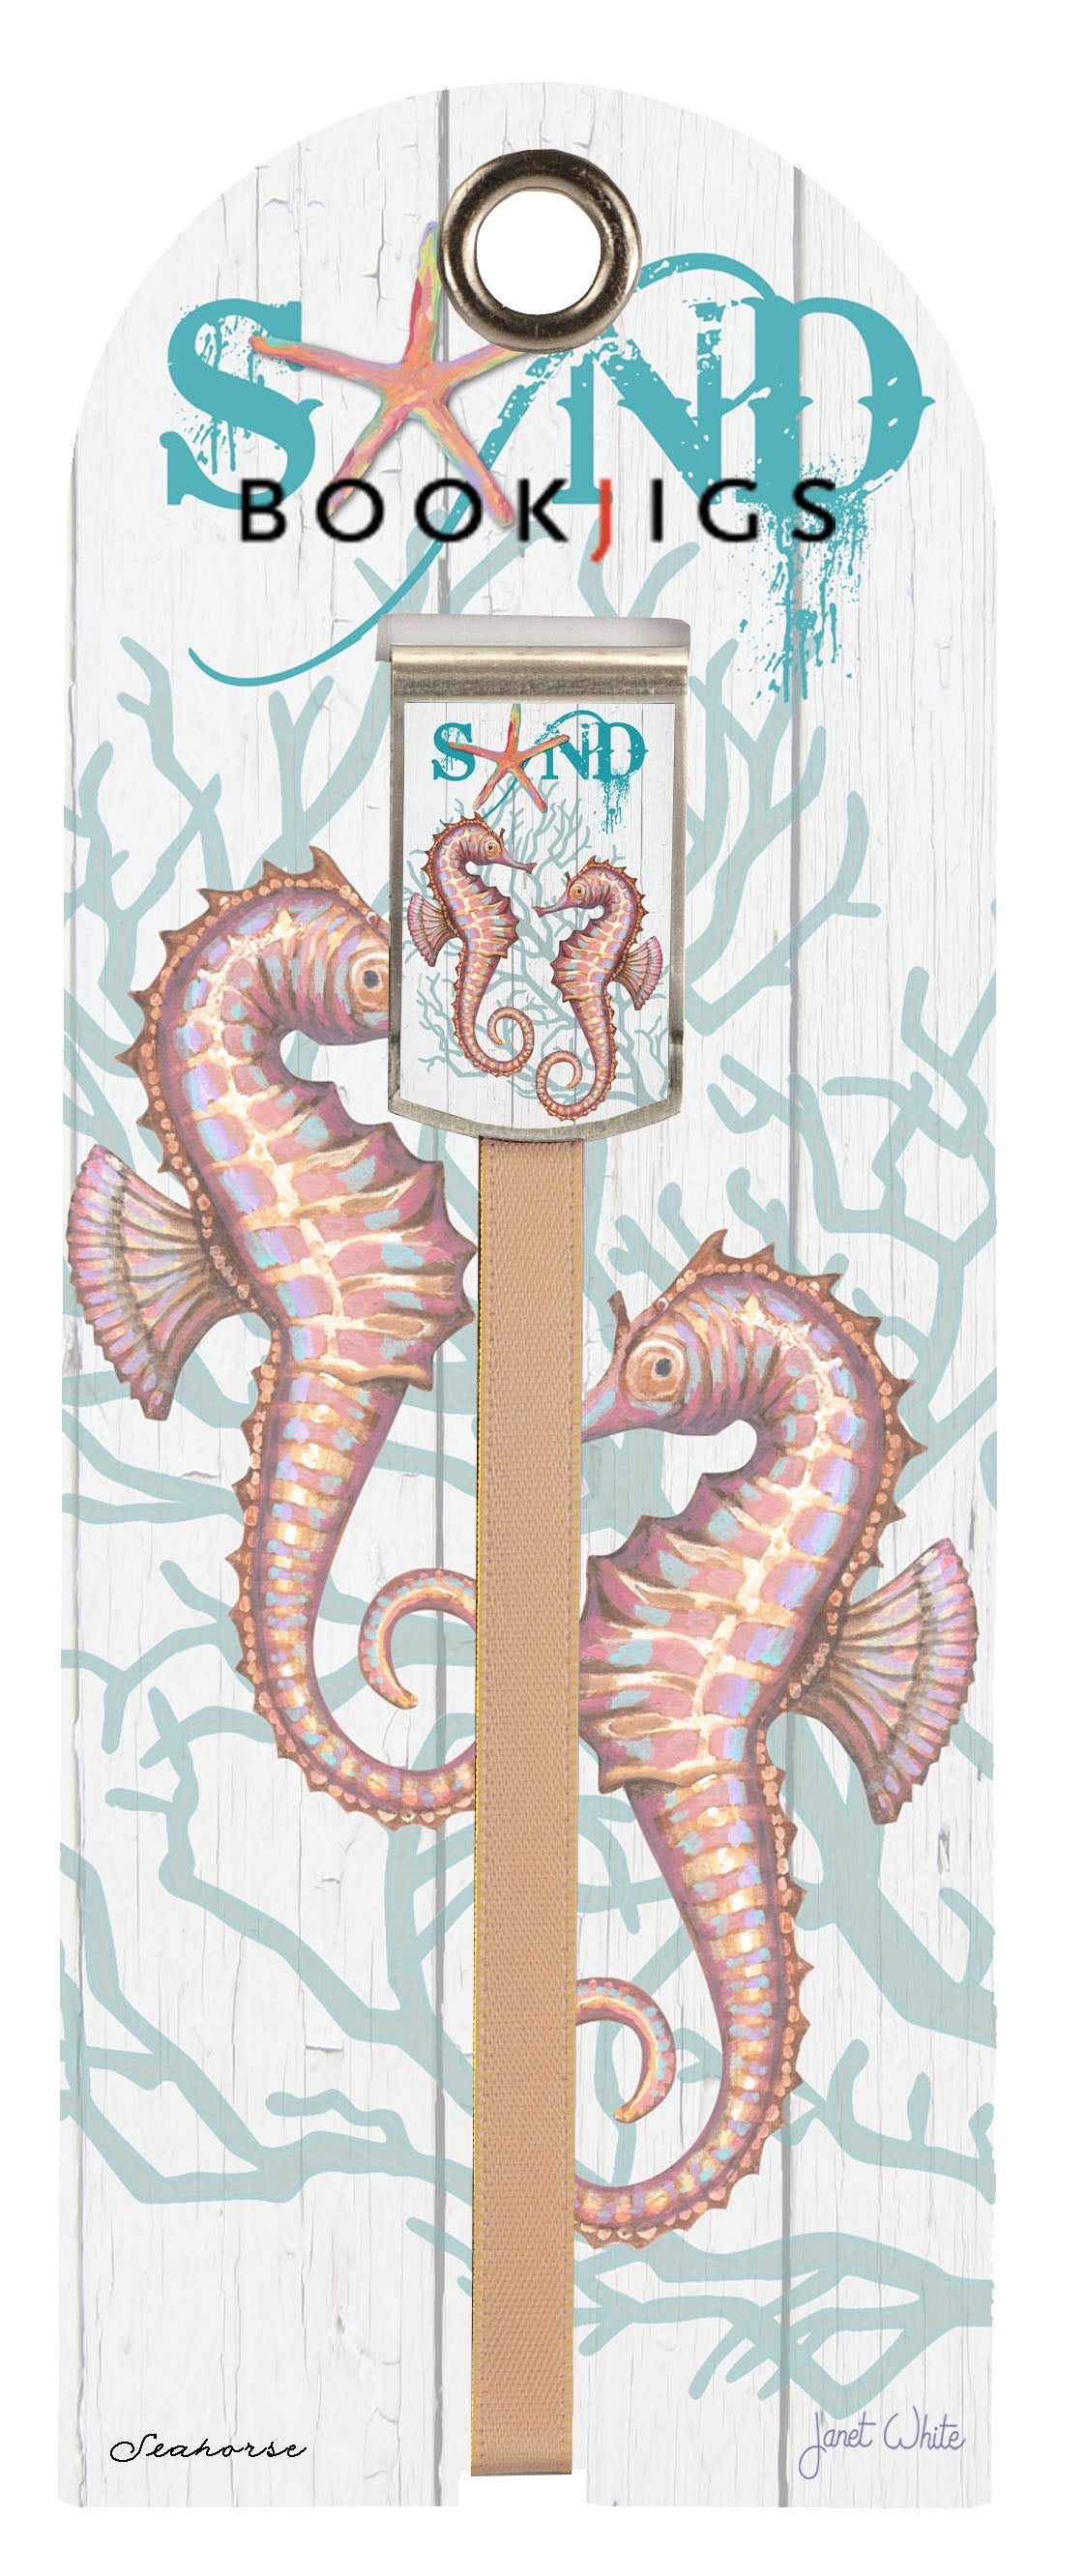 Seahorse- Bookjig by White Ladybug Inc. - book gift